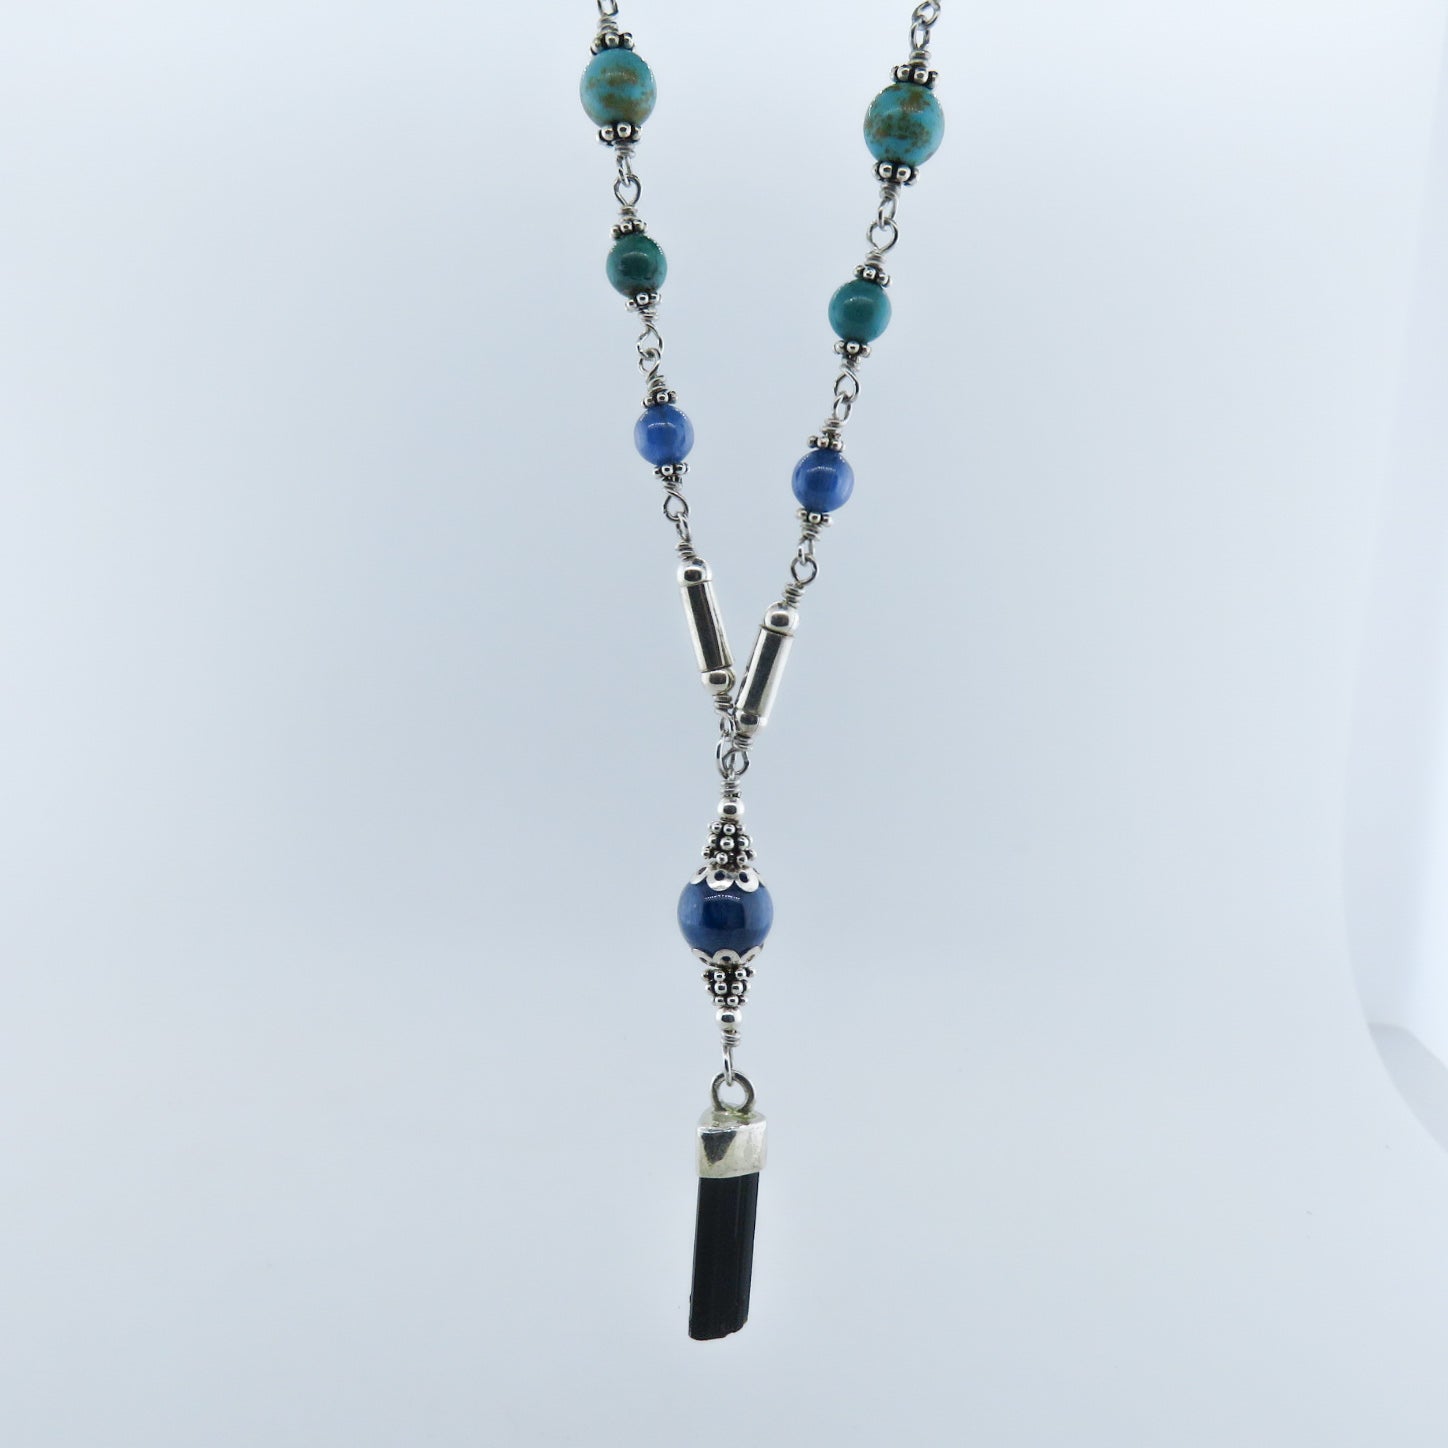 Black Tourmaline Necklace with Kyanite, Turquoise and Sterling Silver